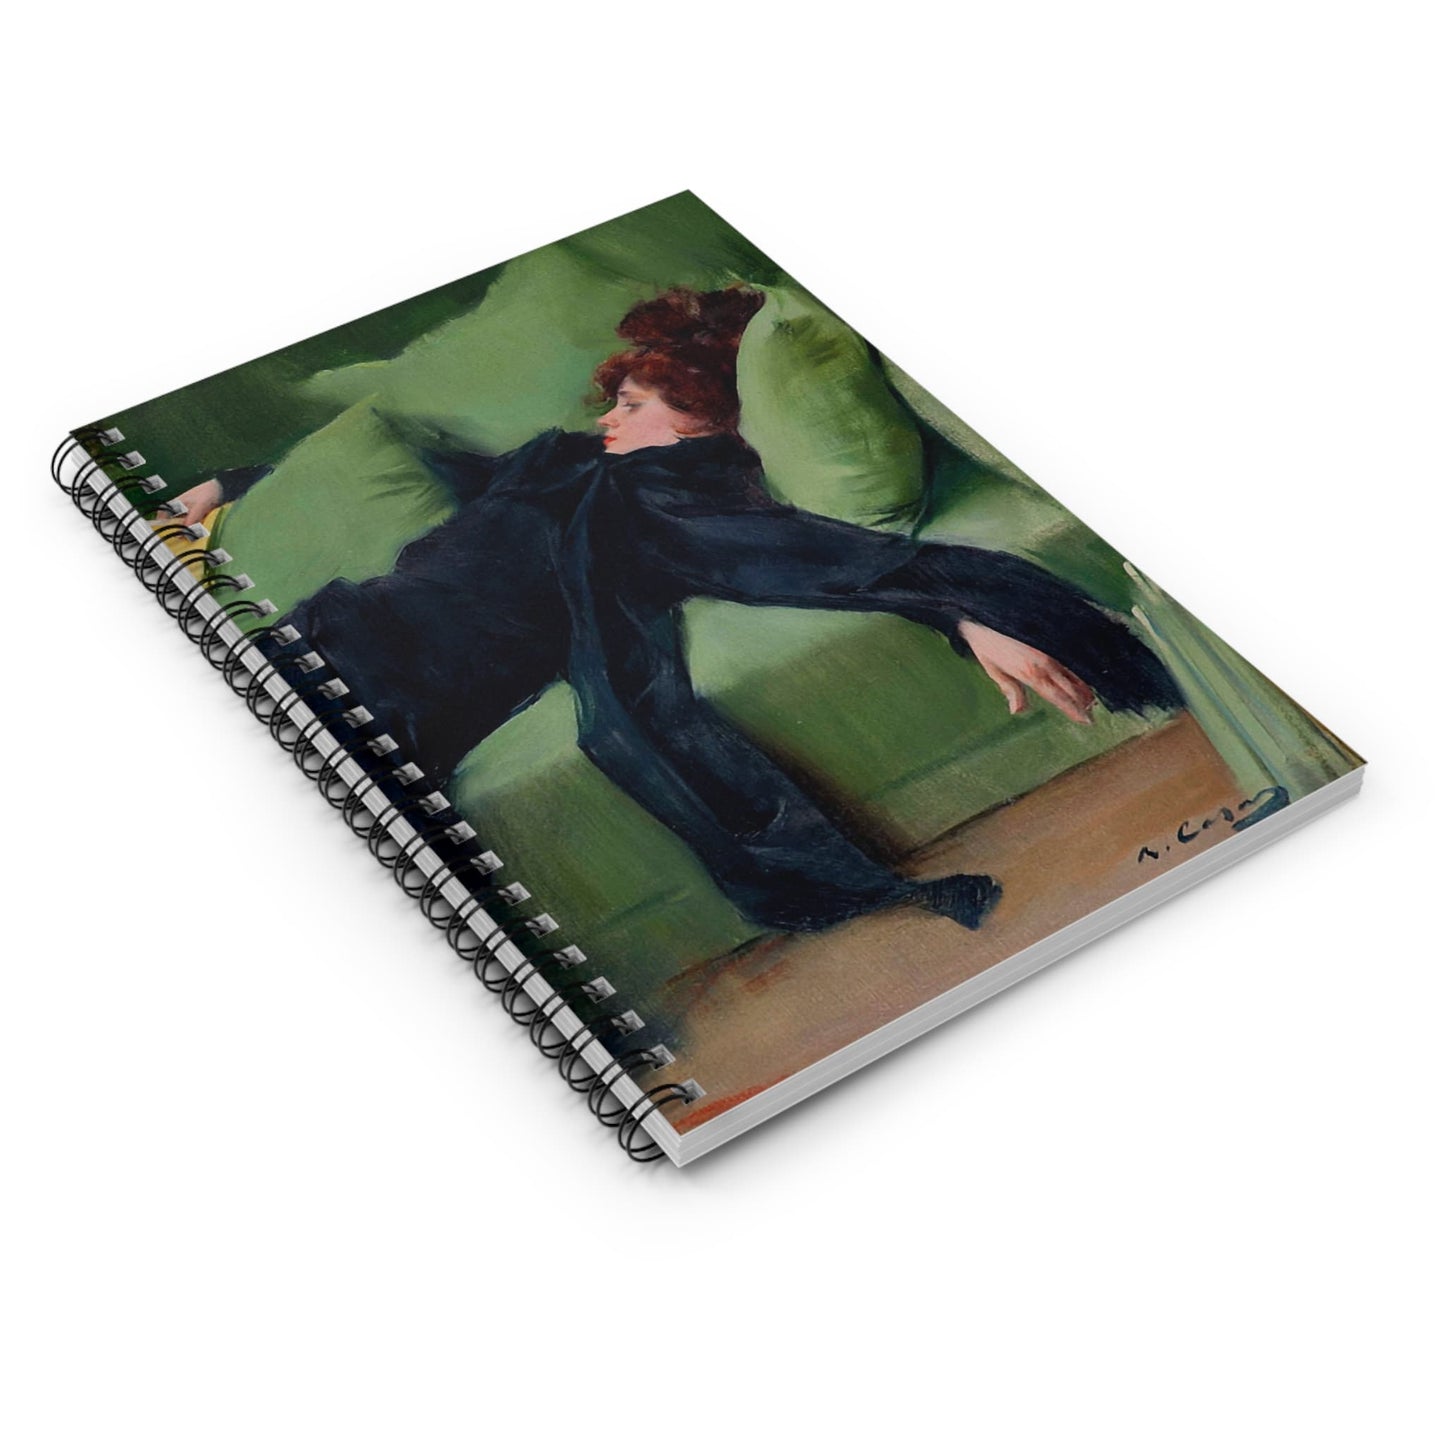 Victorian Aesthetic Spiral Notebook Laying Flat on White Surface